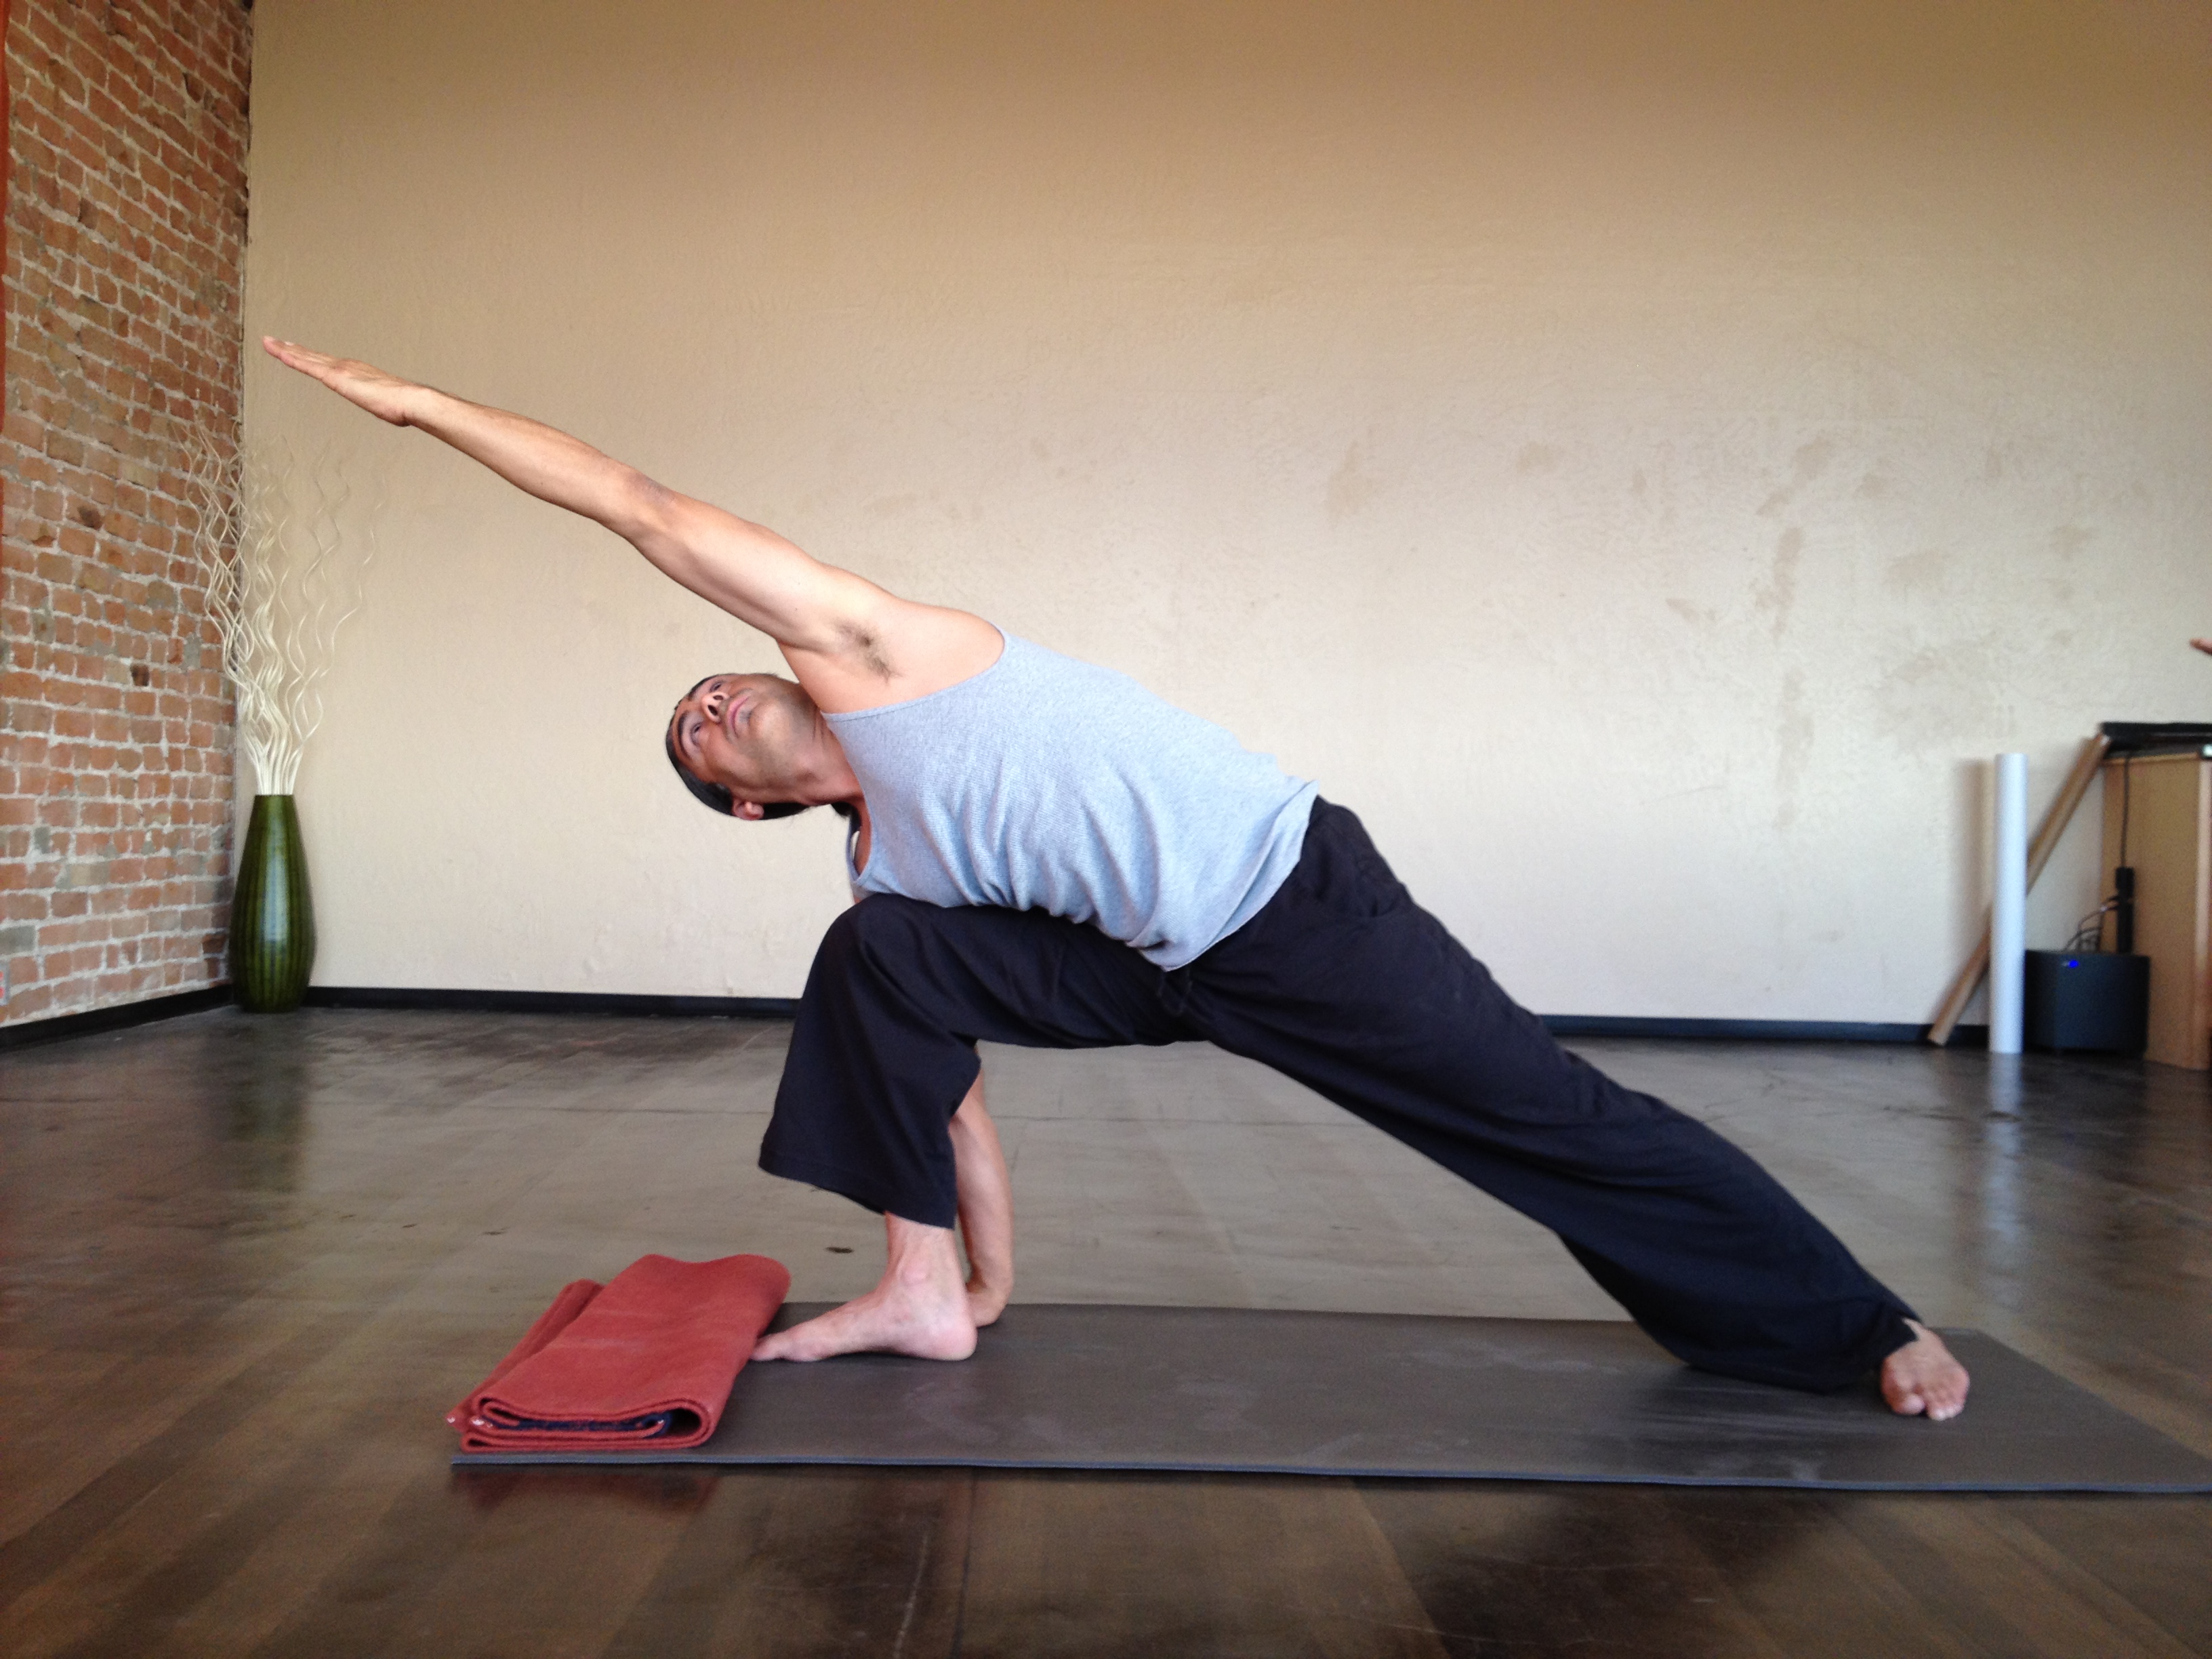 Roman's Weekly Yoga Pose for Increased Stamina and More! - ManagedMoms.com